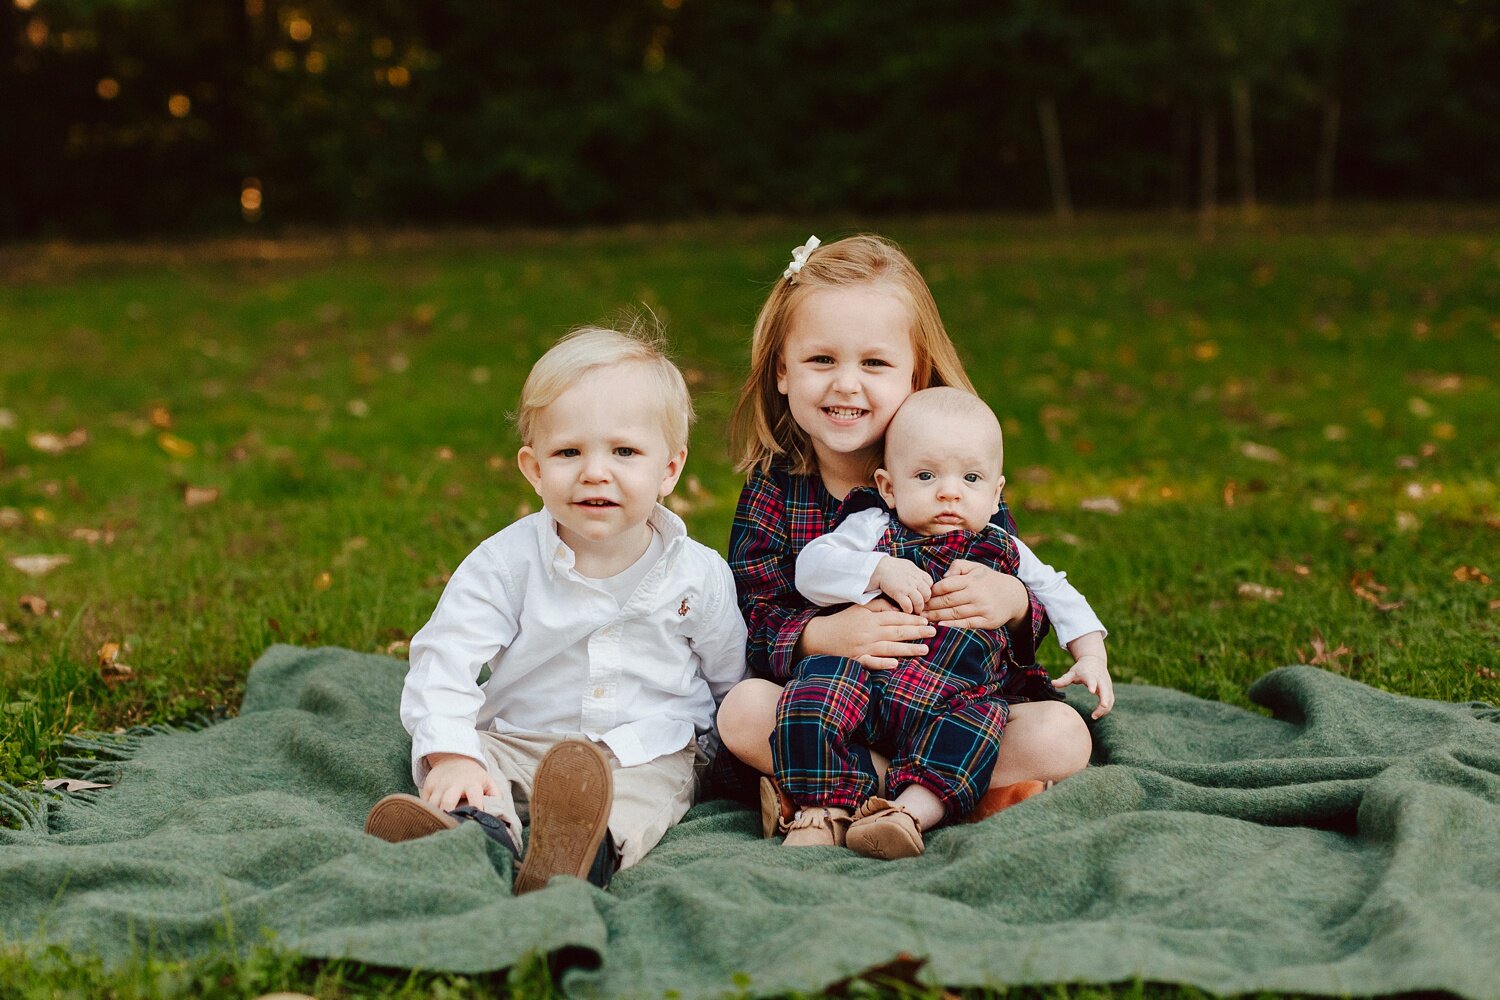 Princeton, New Jersey Family Photo session in the Fall